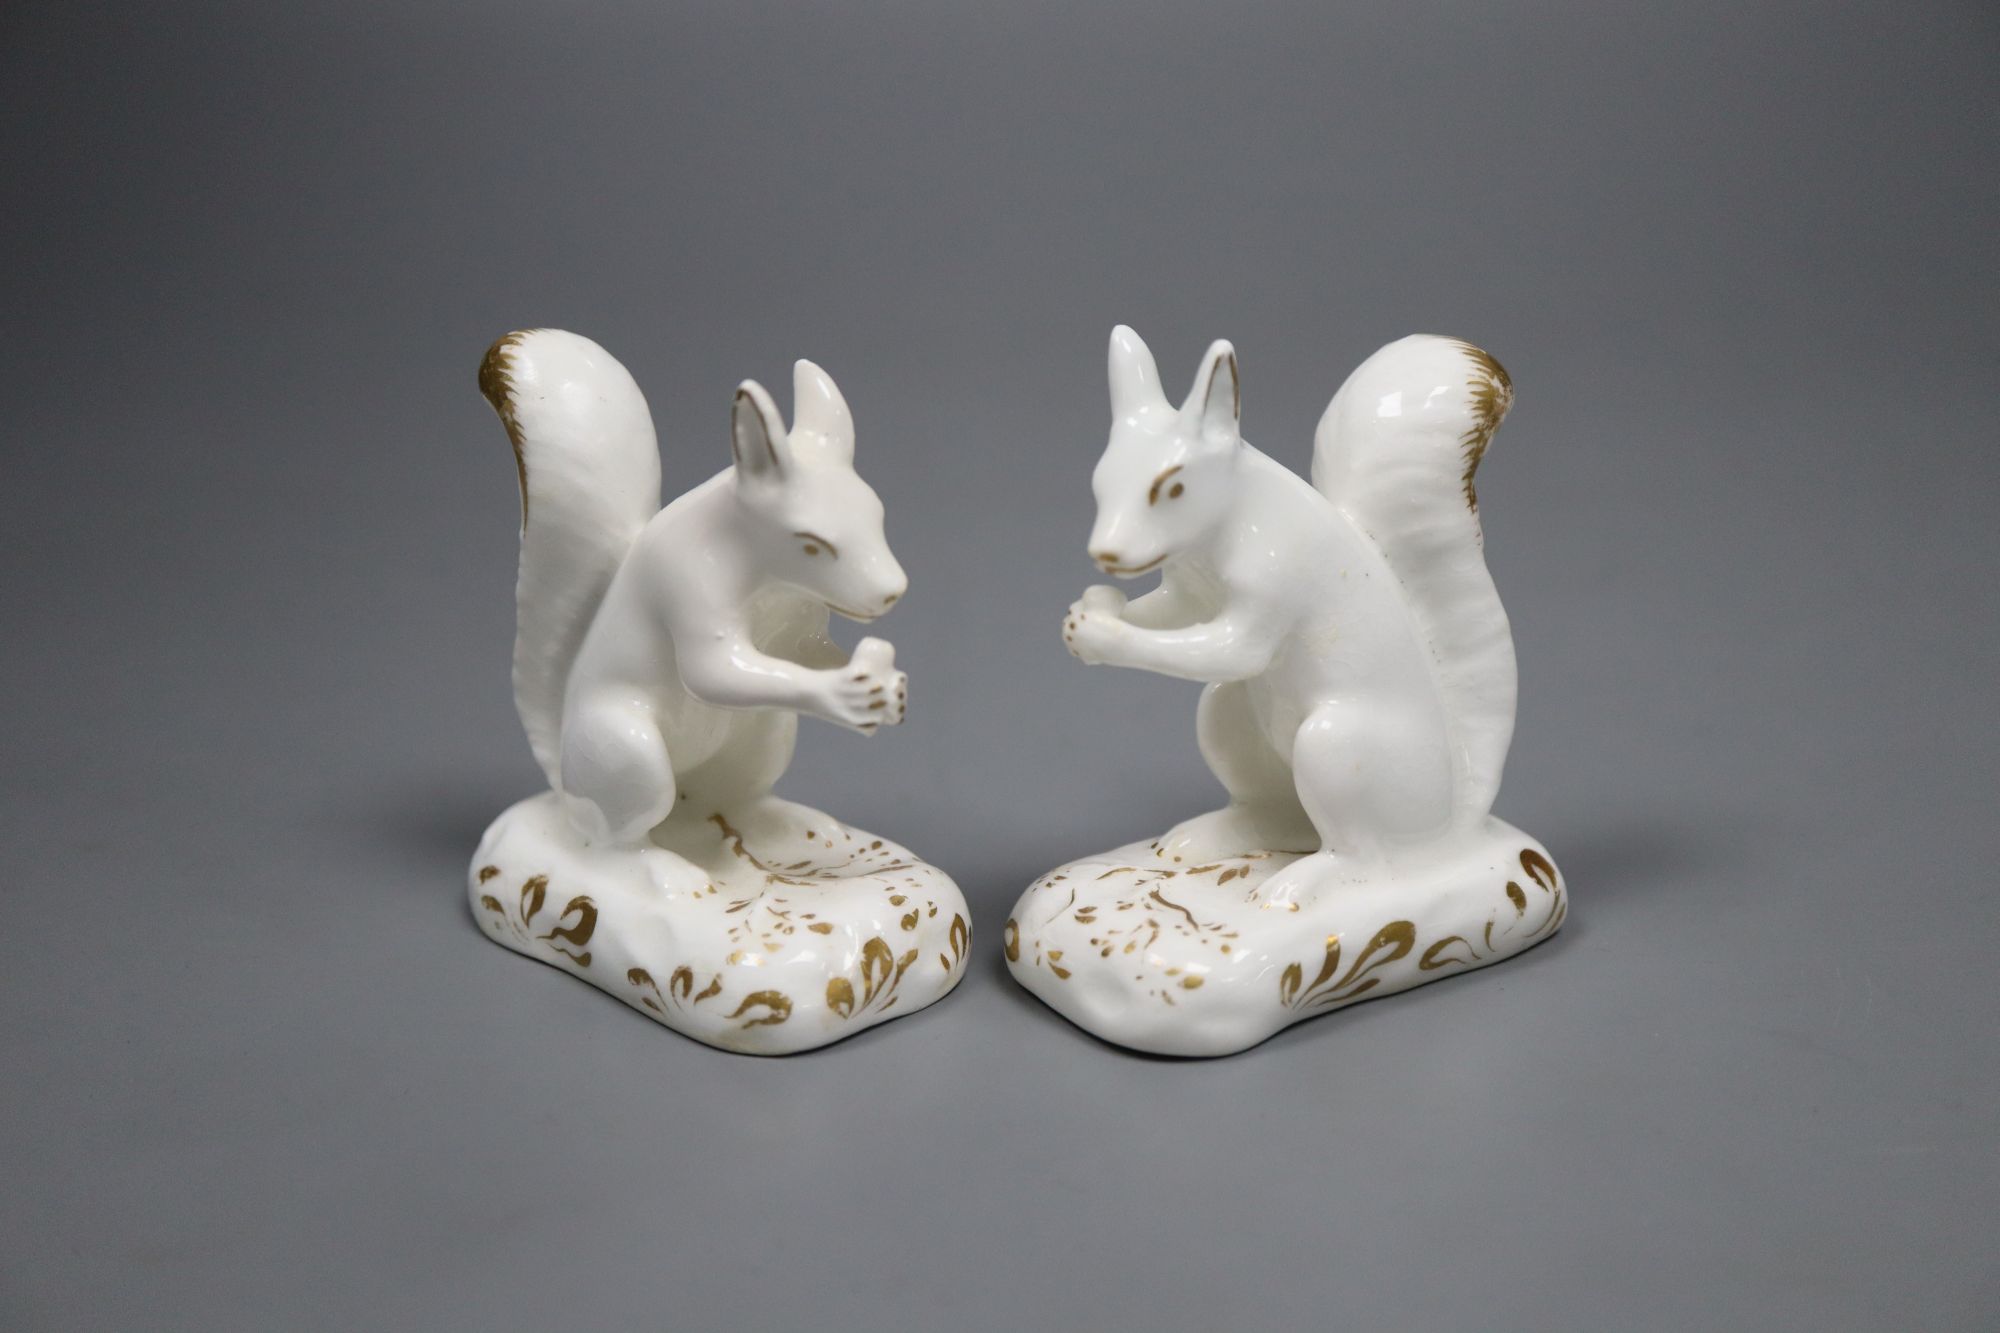 A pair of Grainger, Lee & Co. gilt and white porcelain figures of squirrels, c.1820-37, 6.5cm high